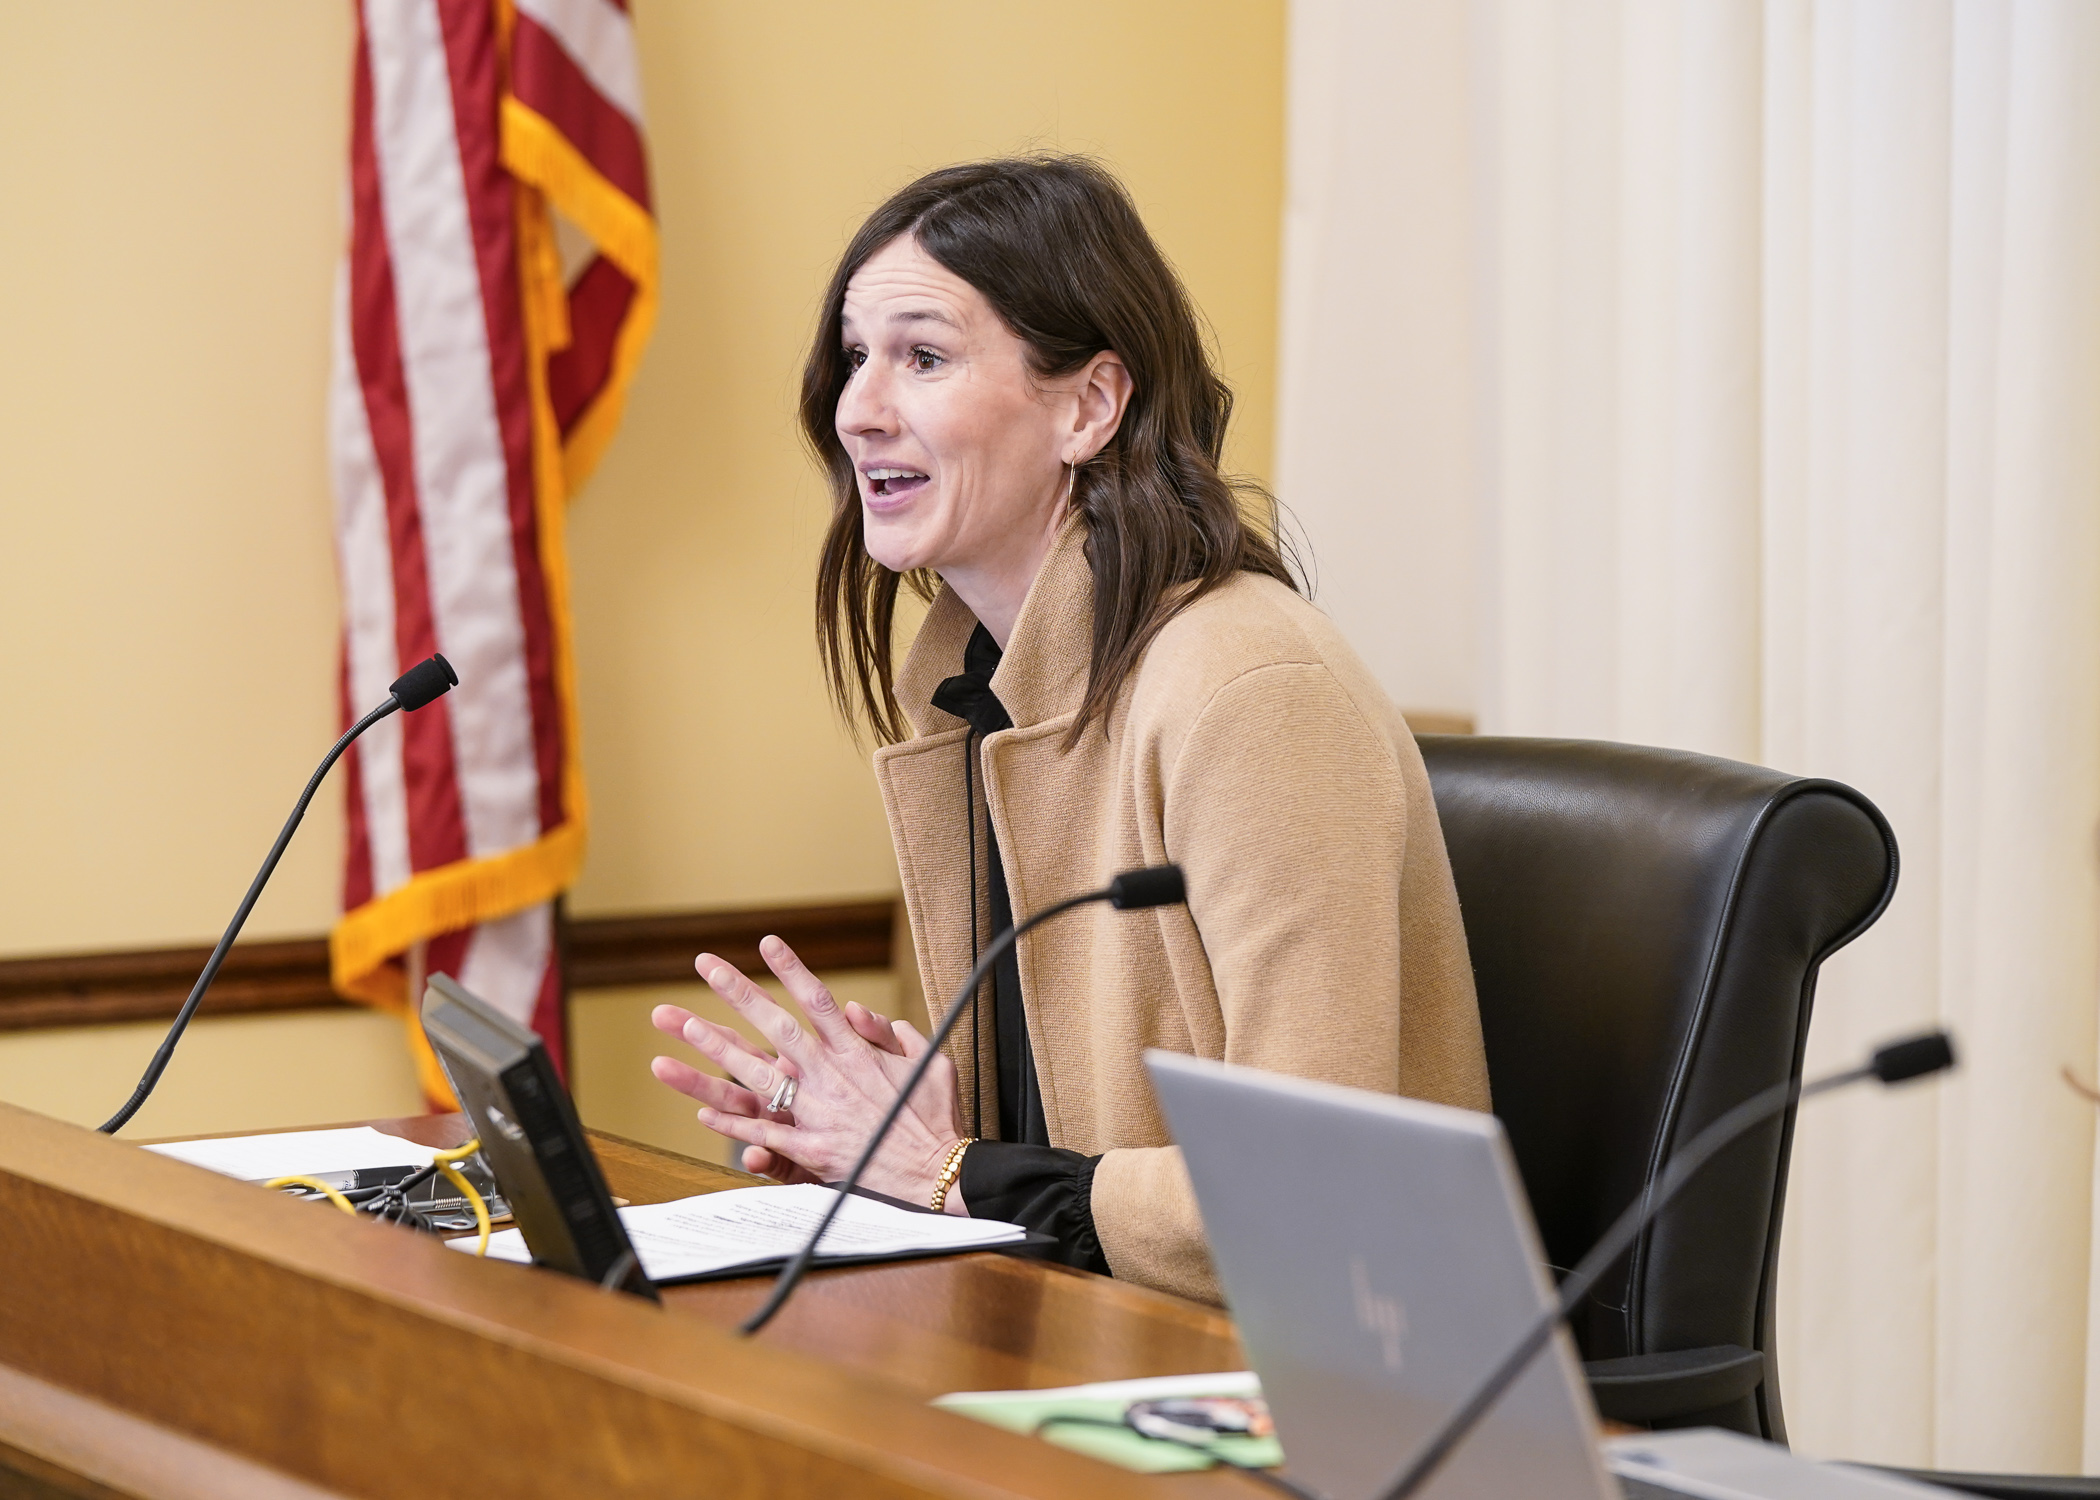 Nicole Woodward, special education director for the St. Croix River Education District, testifies before House lawmakers in support of HF8, which would fund more student support personnel in Minnesota schools. (Photo by Catherine Davis)